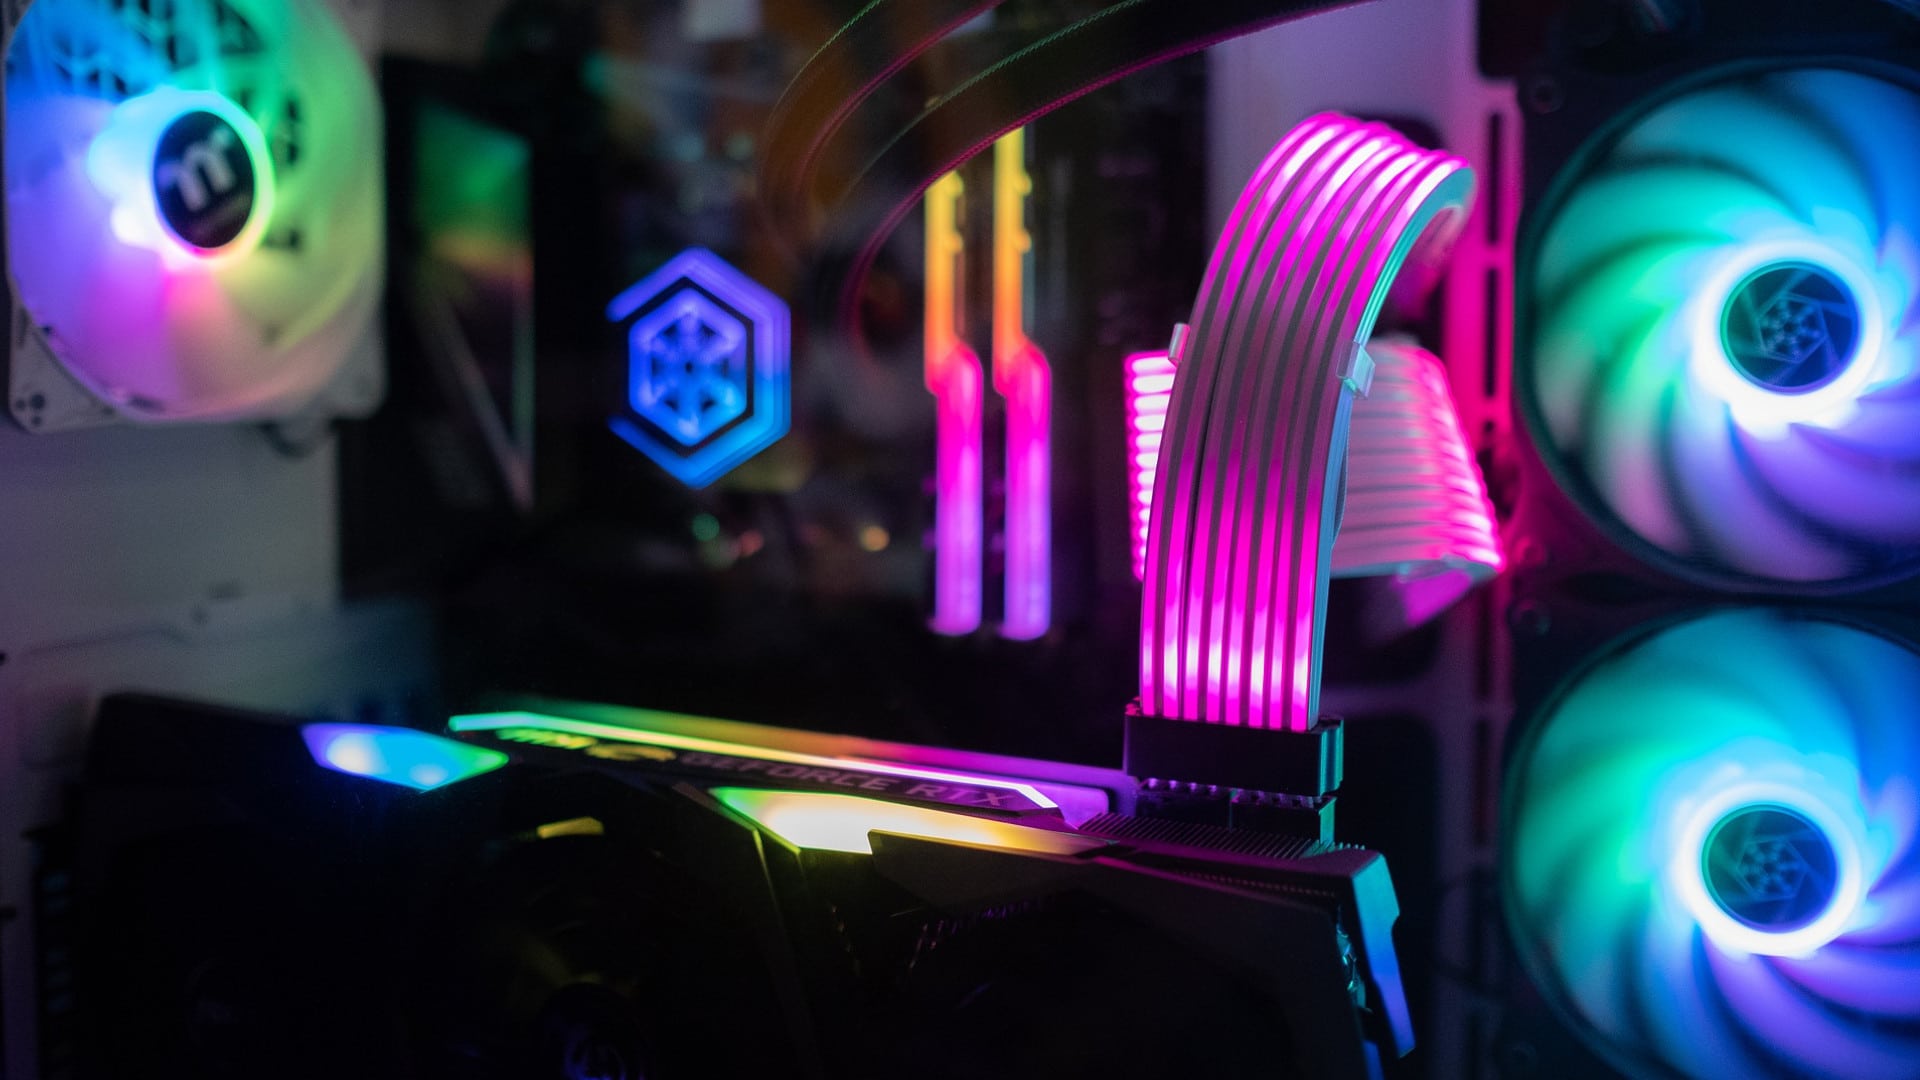 7 upgrades for your gaming PC that you should definitely not buy